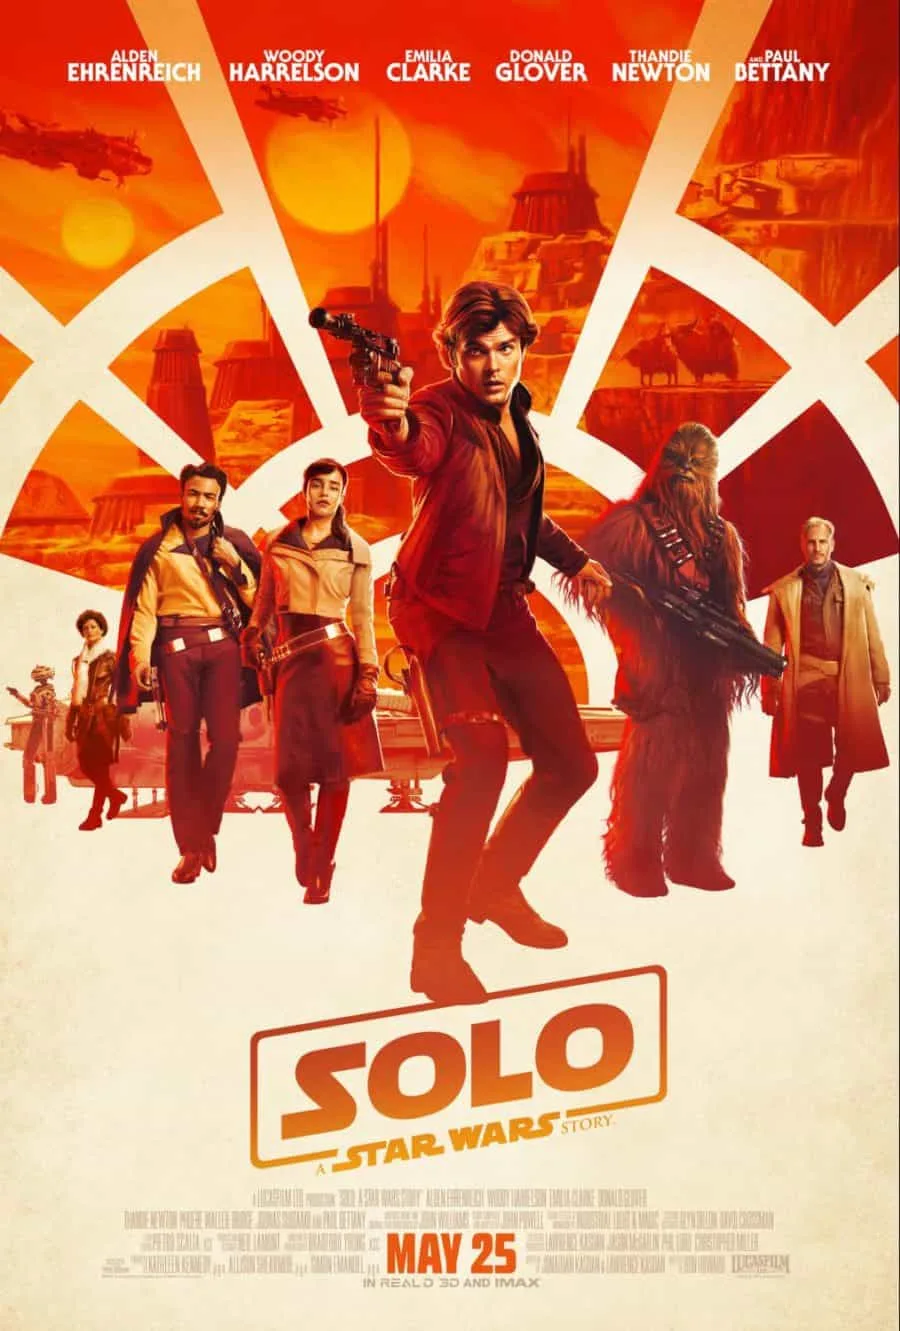 Han Solo - A Star Wars Story - Group Poster